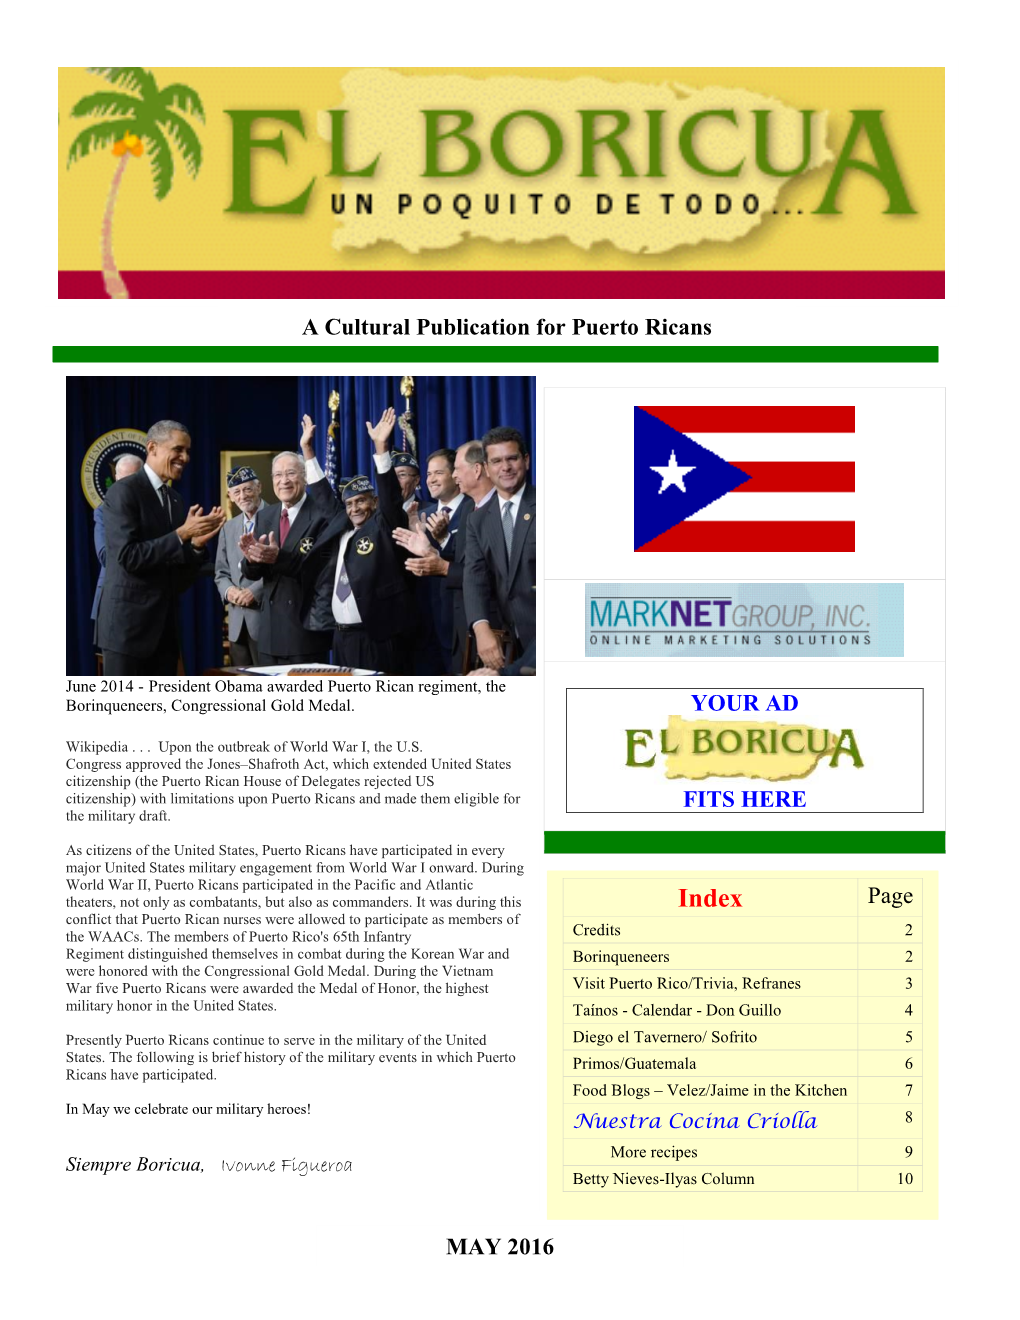 YOUR AD FITS HERE a Cultural Publication for Puerto Ricans Page